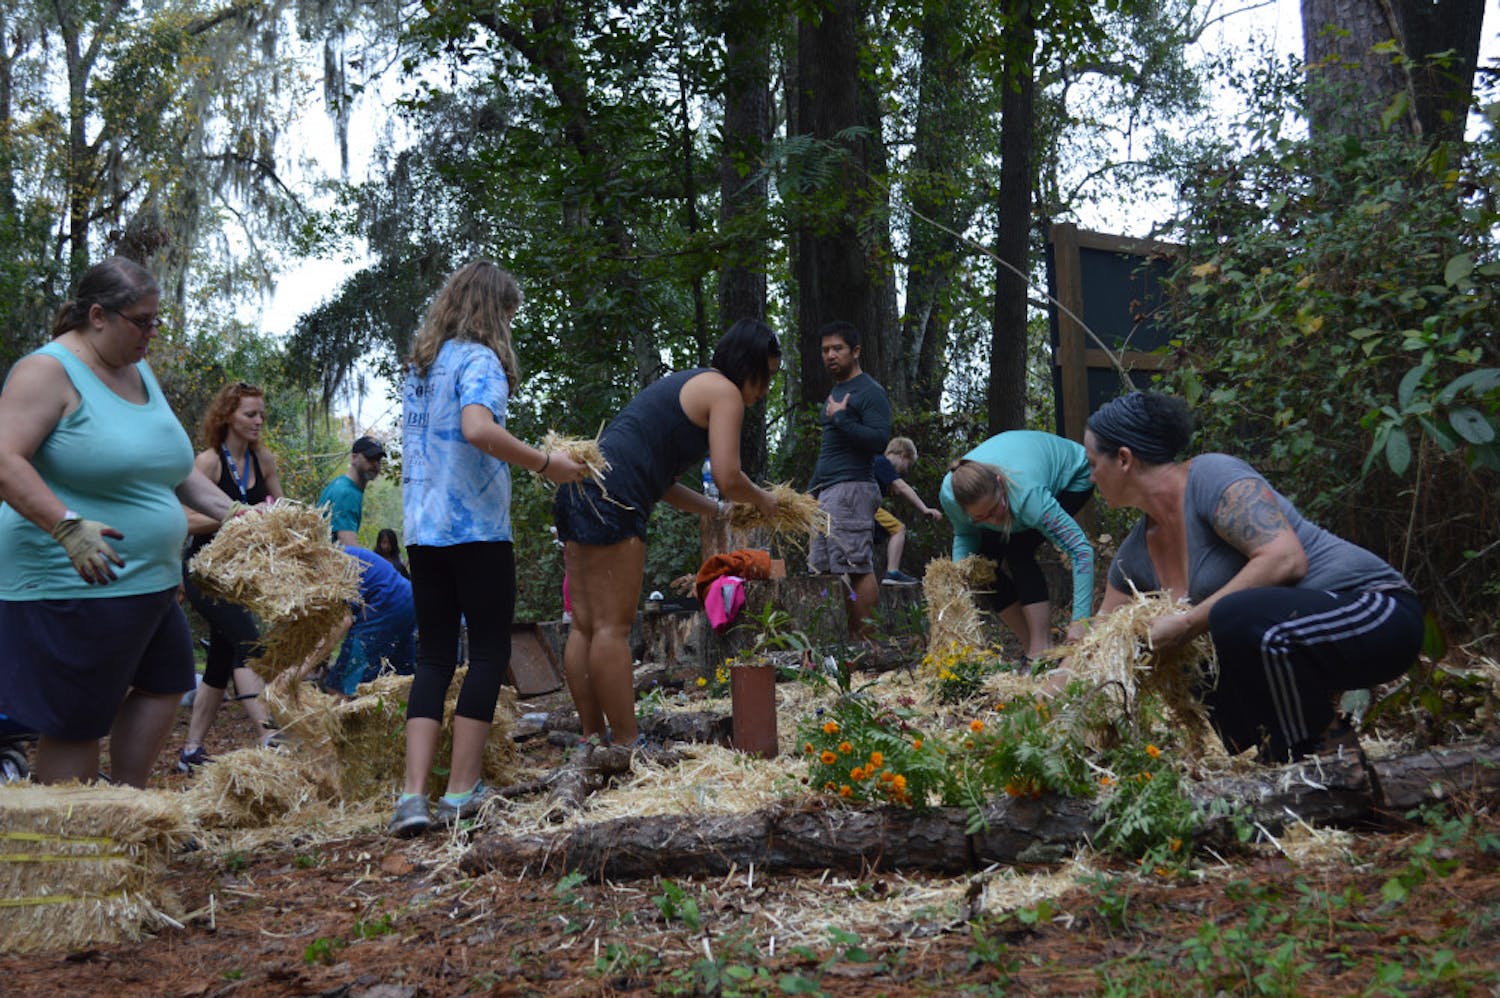 Volunteers spread hay after planting marigolds, milkweed and other perennials beside an outdoor classroom at Stephen Foster Elementary School. They took the day to beautify the campus in the wake of media specialist Leslie Williams’ death. Gillian Sweeney / Alligator Staff 